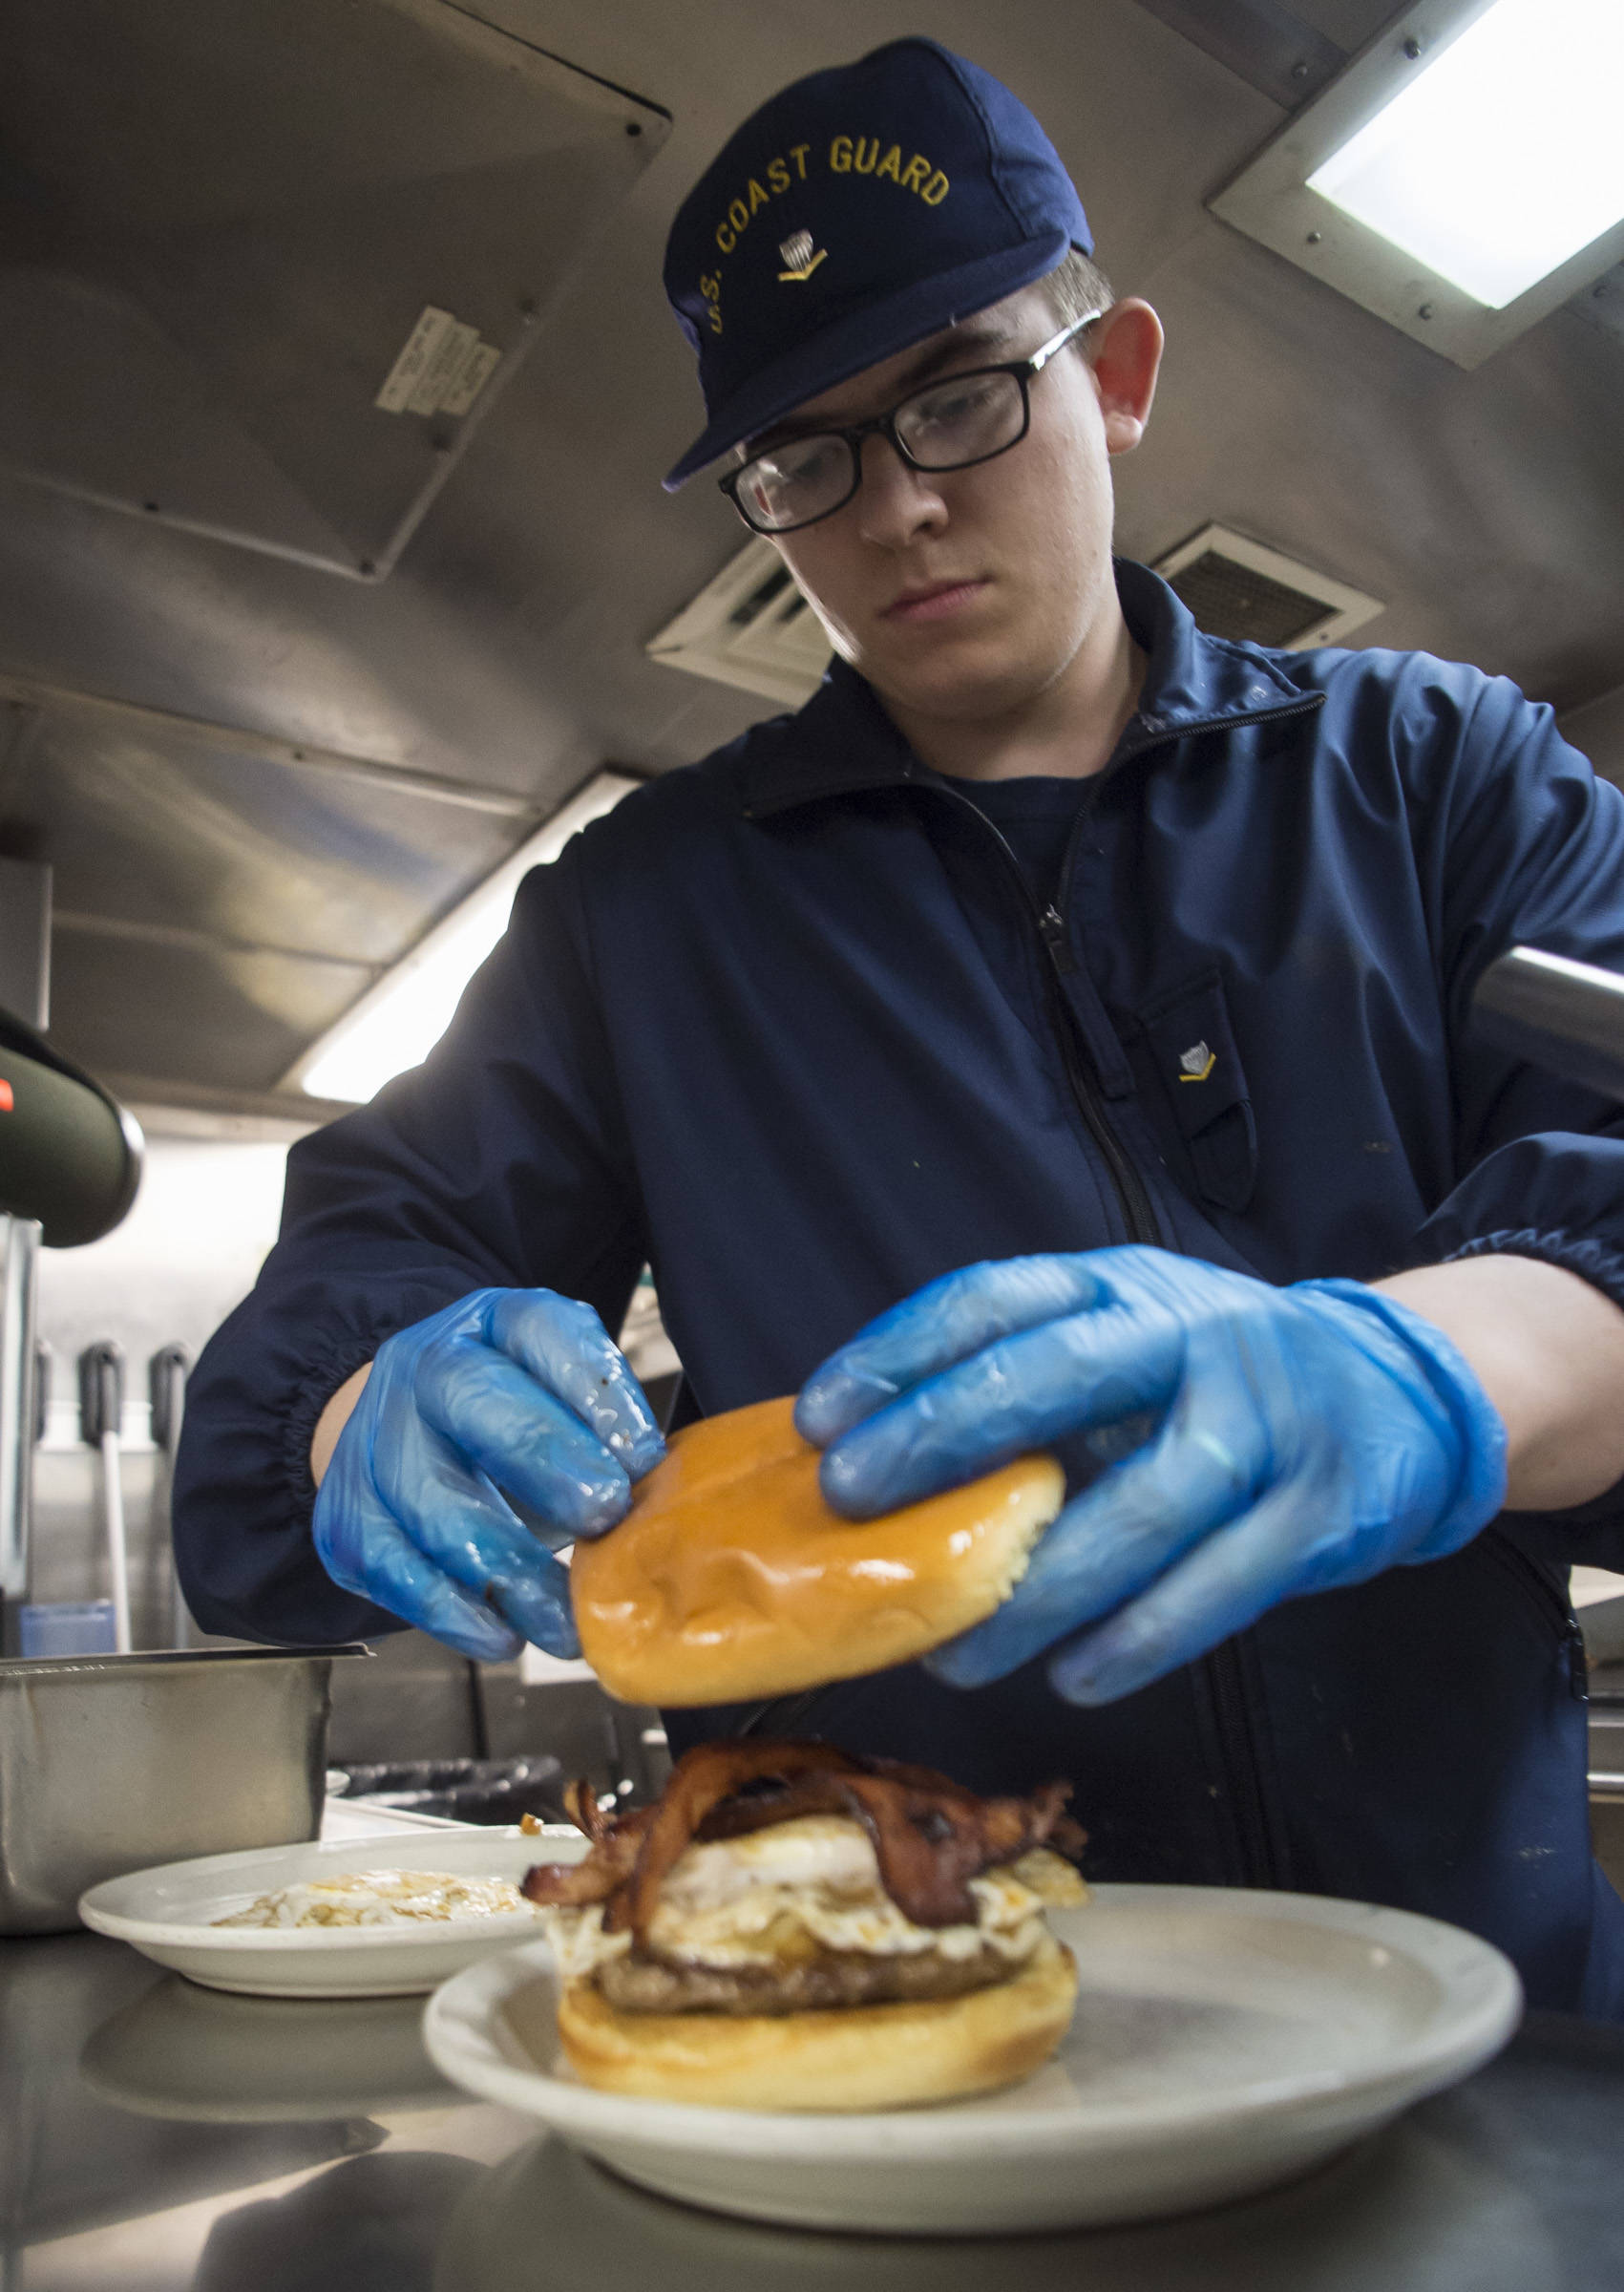 Chef Berkeley Scott, of the buoy tender Hickory, prepares two burgers to be judged on Thursday, Aug. 23, 2018. (Michael Penn | Juneau Empire)